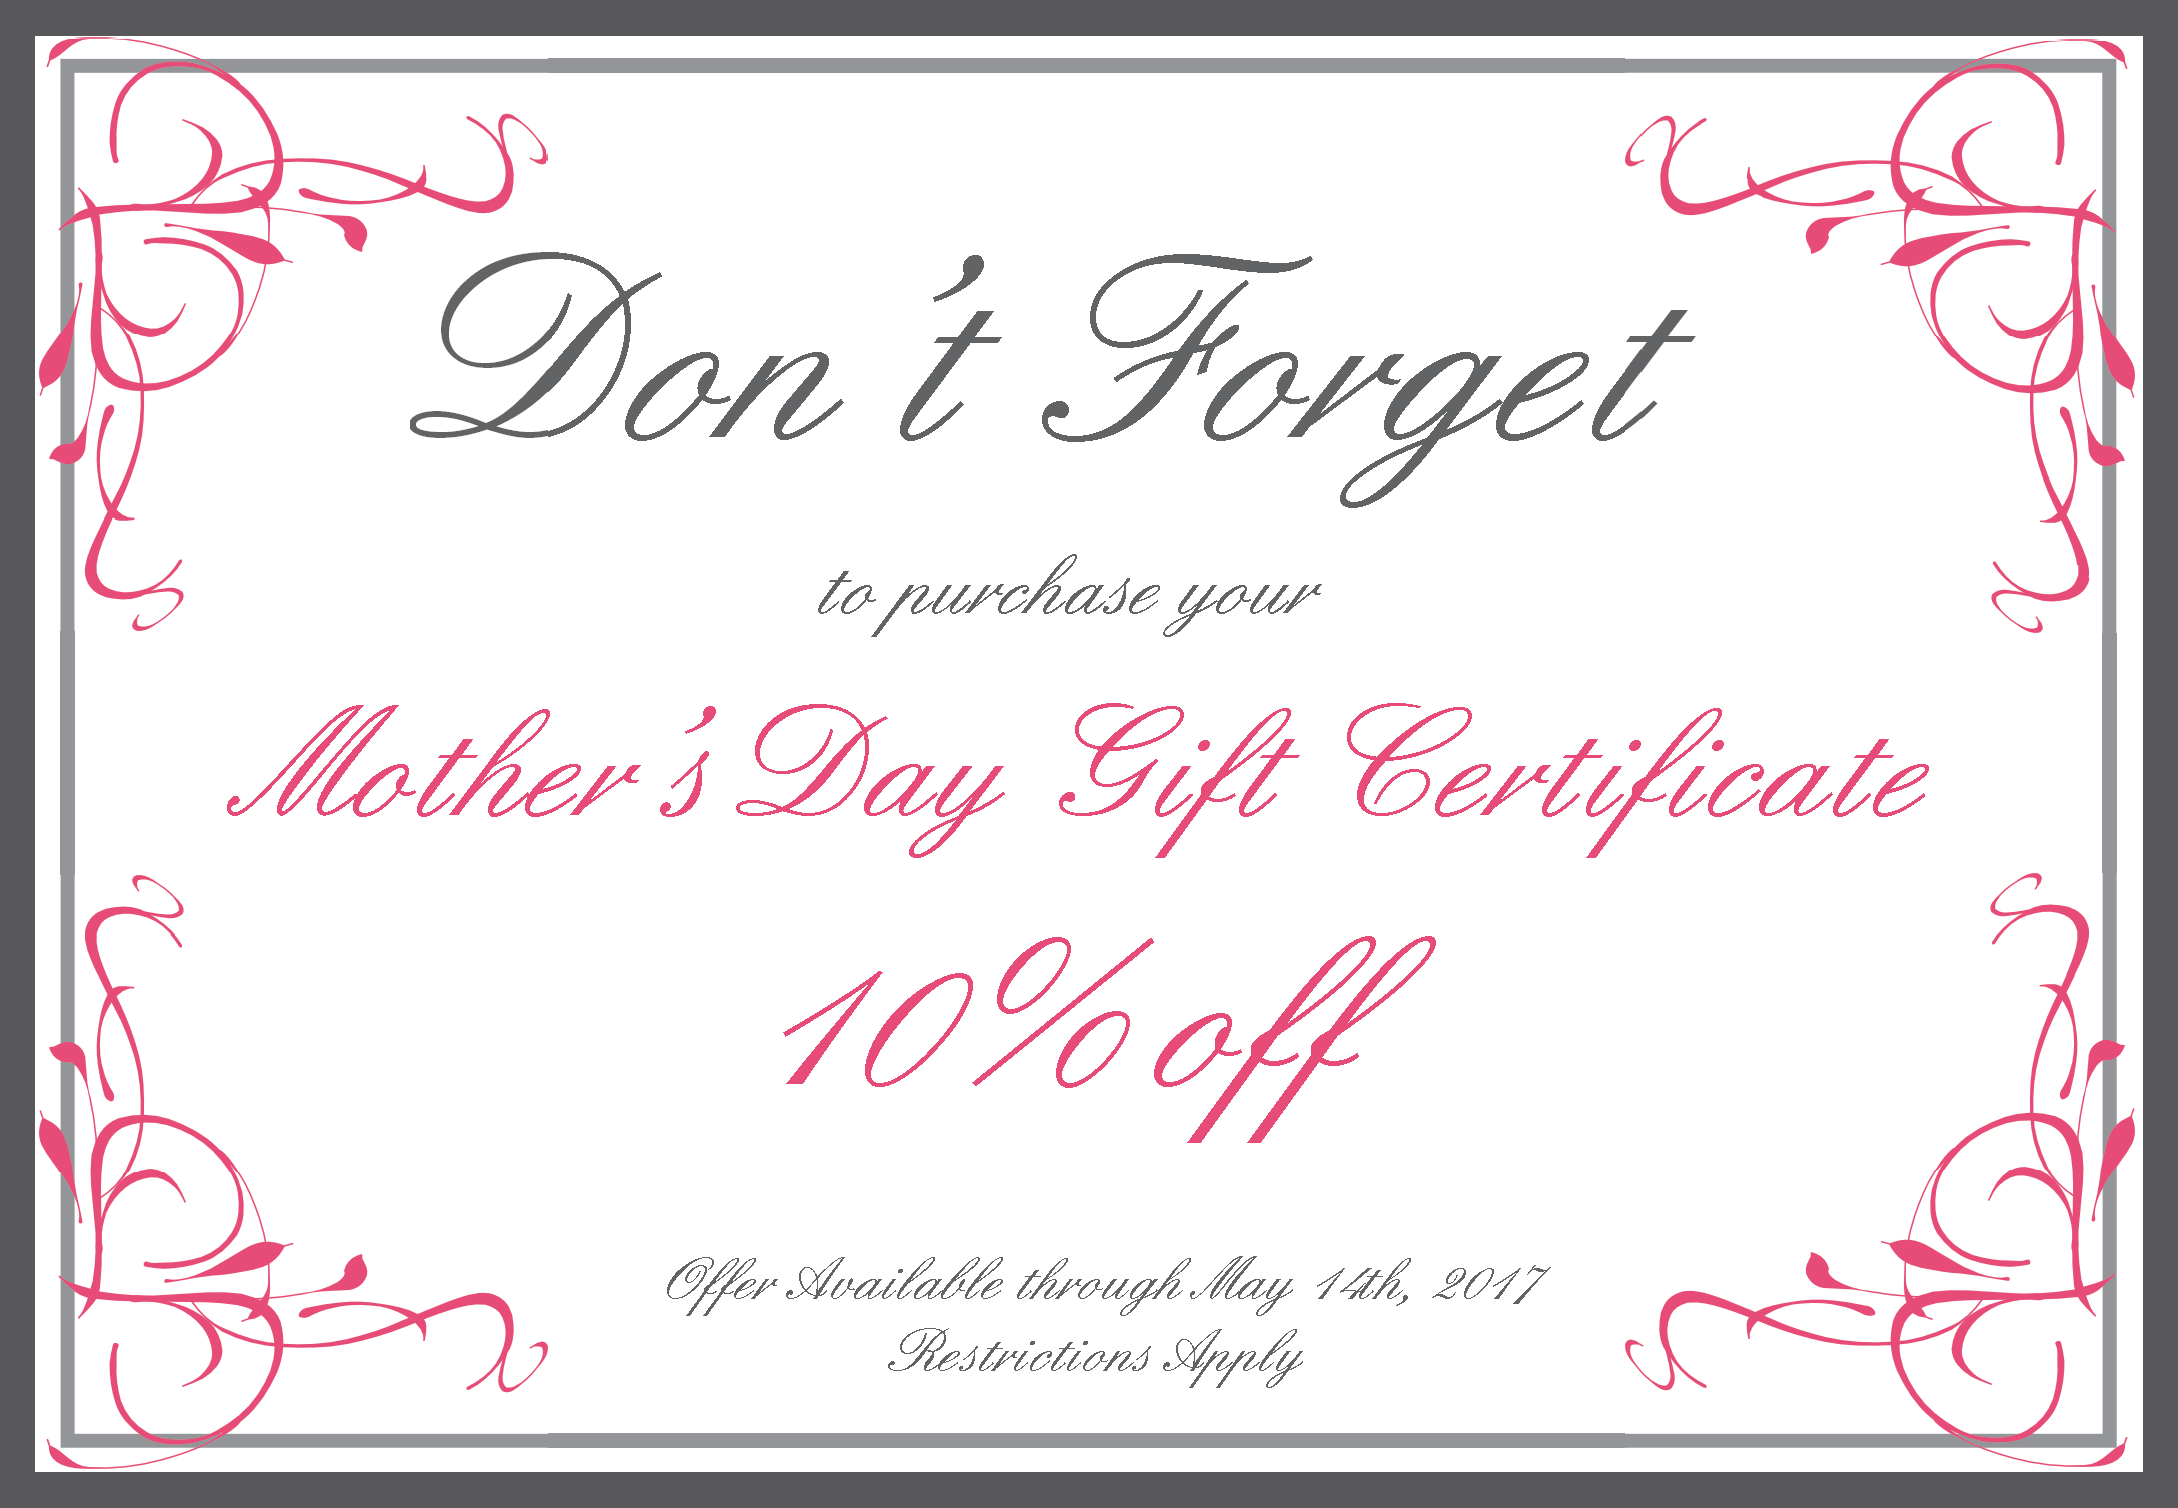 Don't forget to purchase your Mother's Day Certificates at 10% off